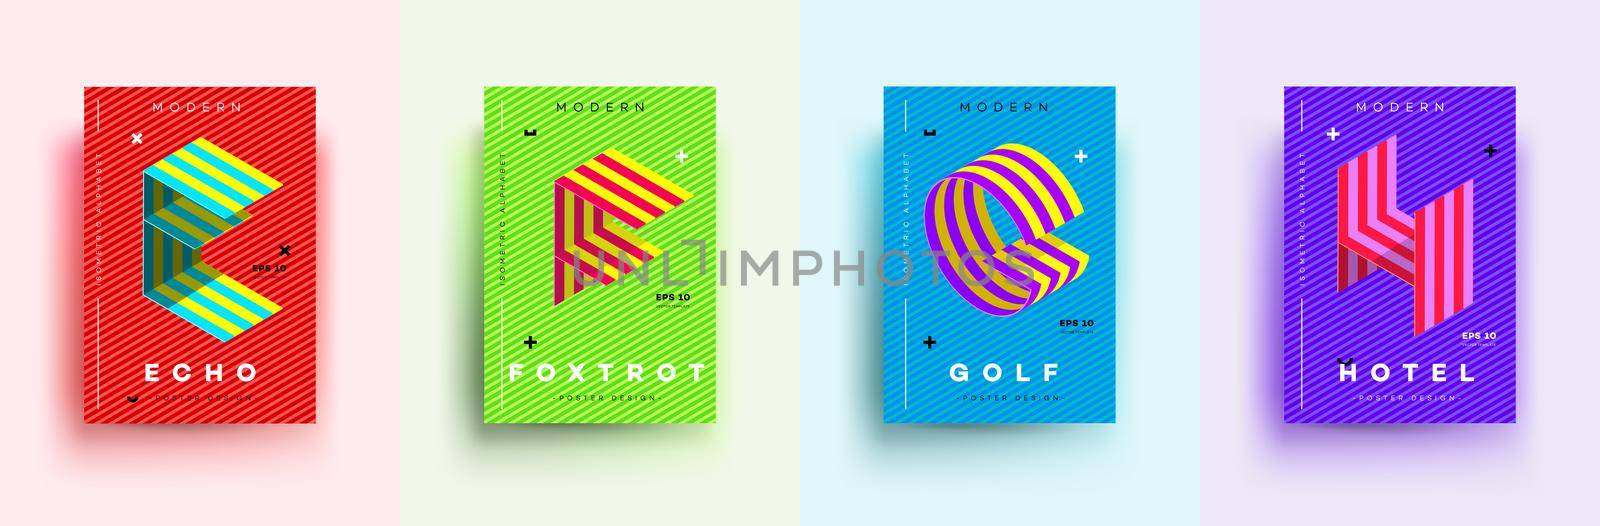 Modern Typographic Colorful Covers. Isometric Letters E, F, G, H With Abstract Memphis Design Background. Vector Trendy Template For Your Posters, Banners, Presentations, Layouts.